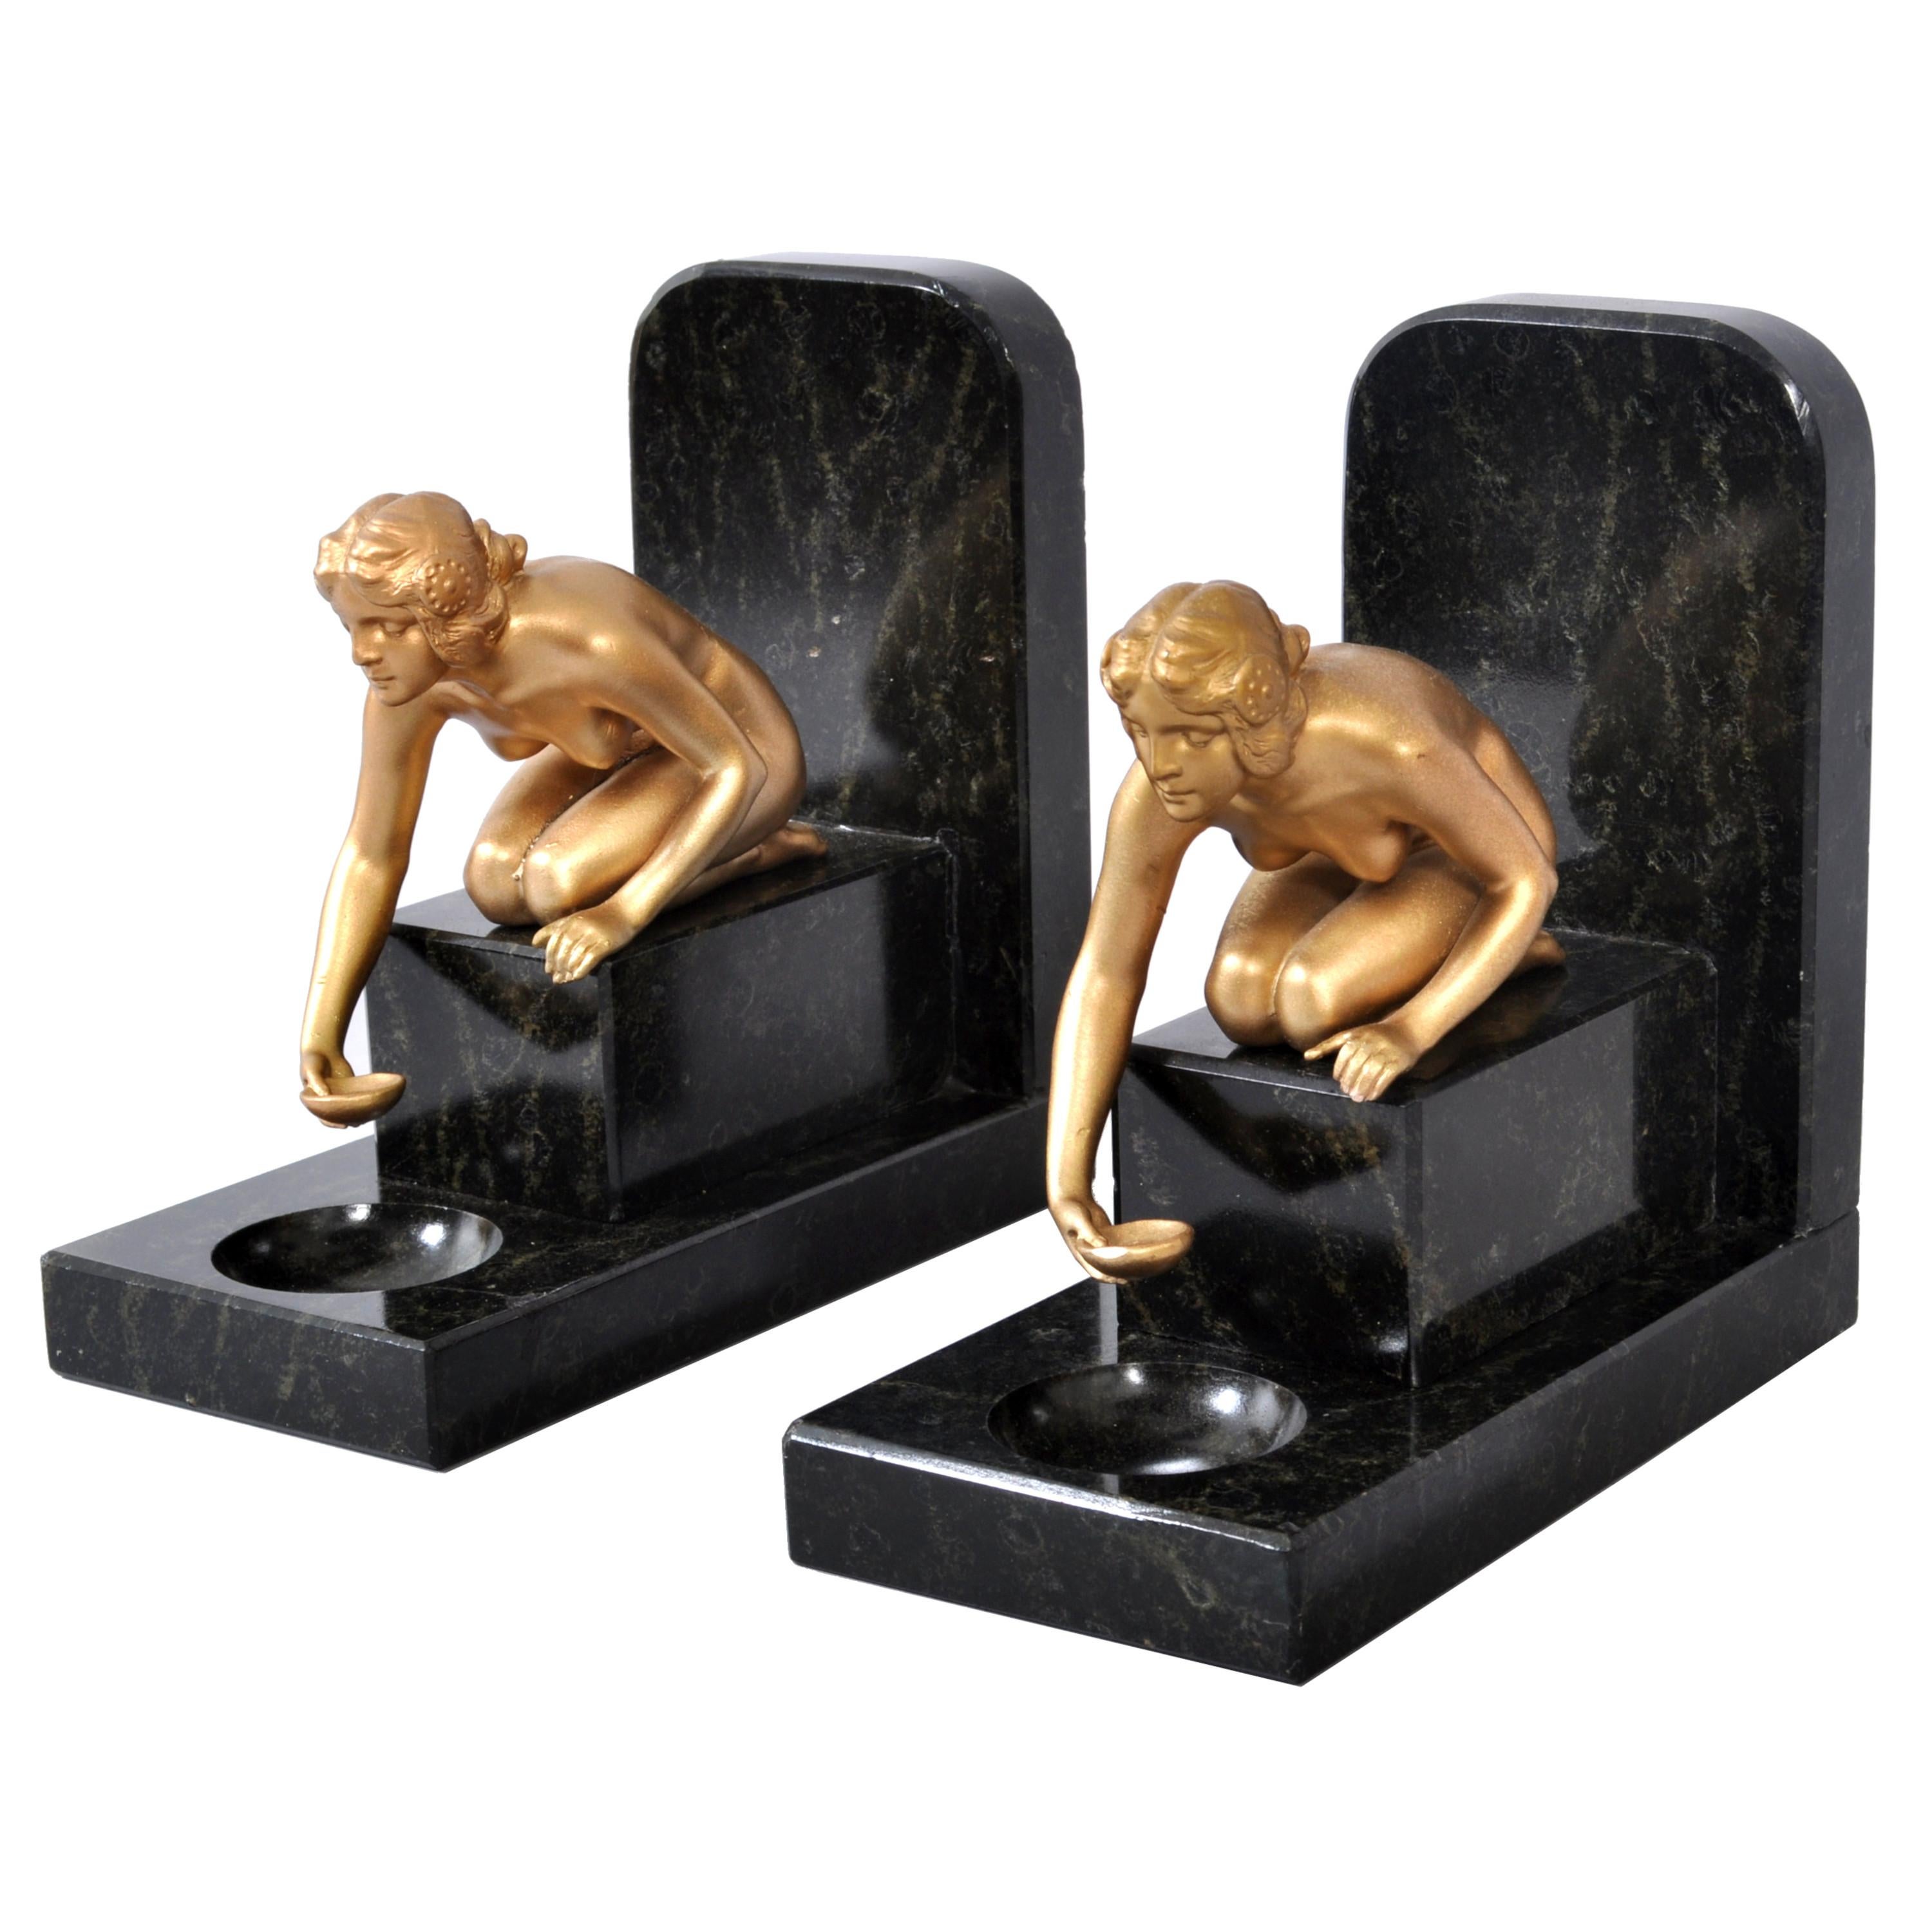 German Pair of Art Deco Gilded Bronze and Marble Female Nude Statue Bookends, 1920s